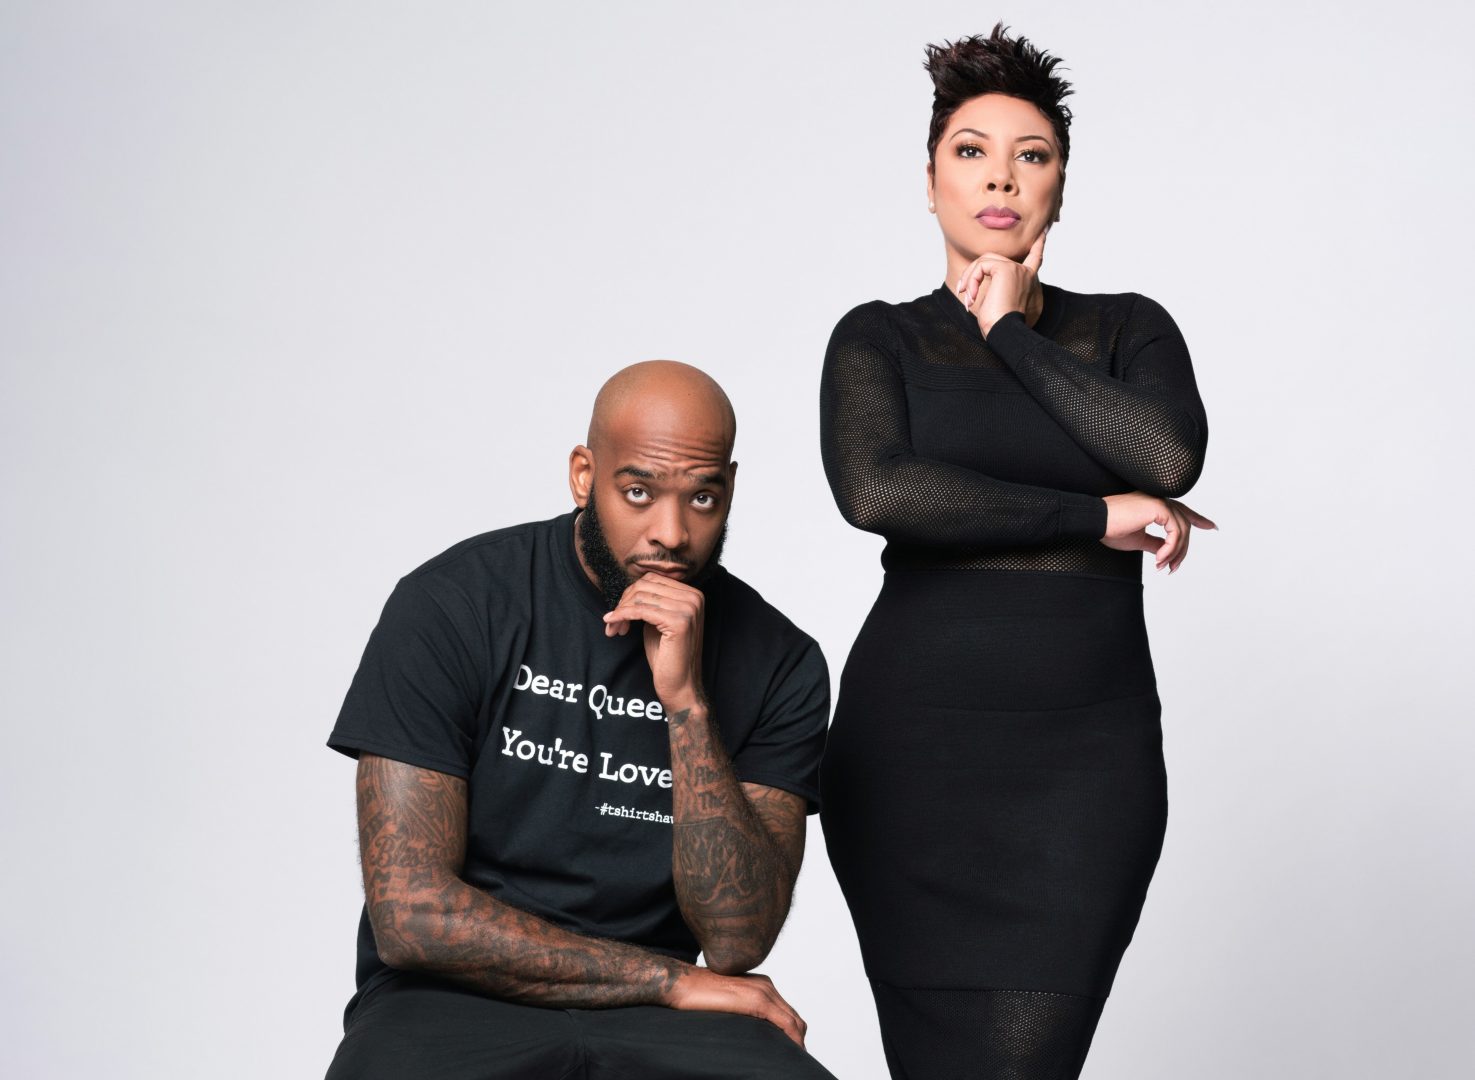 Reality Check with NBA star Josh Powell and CheMinistry founder Chanel Scott